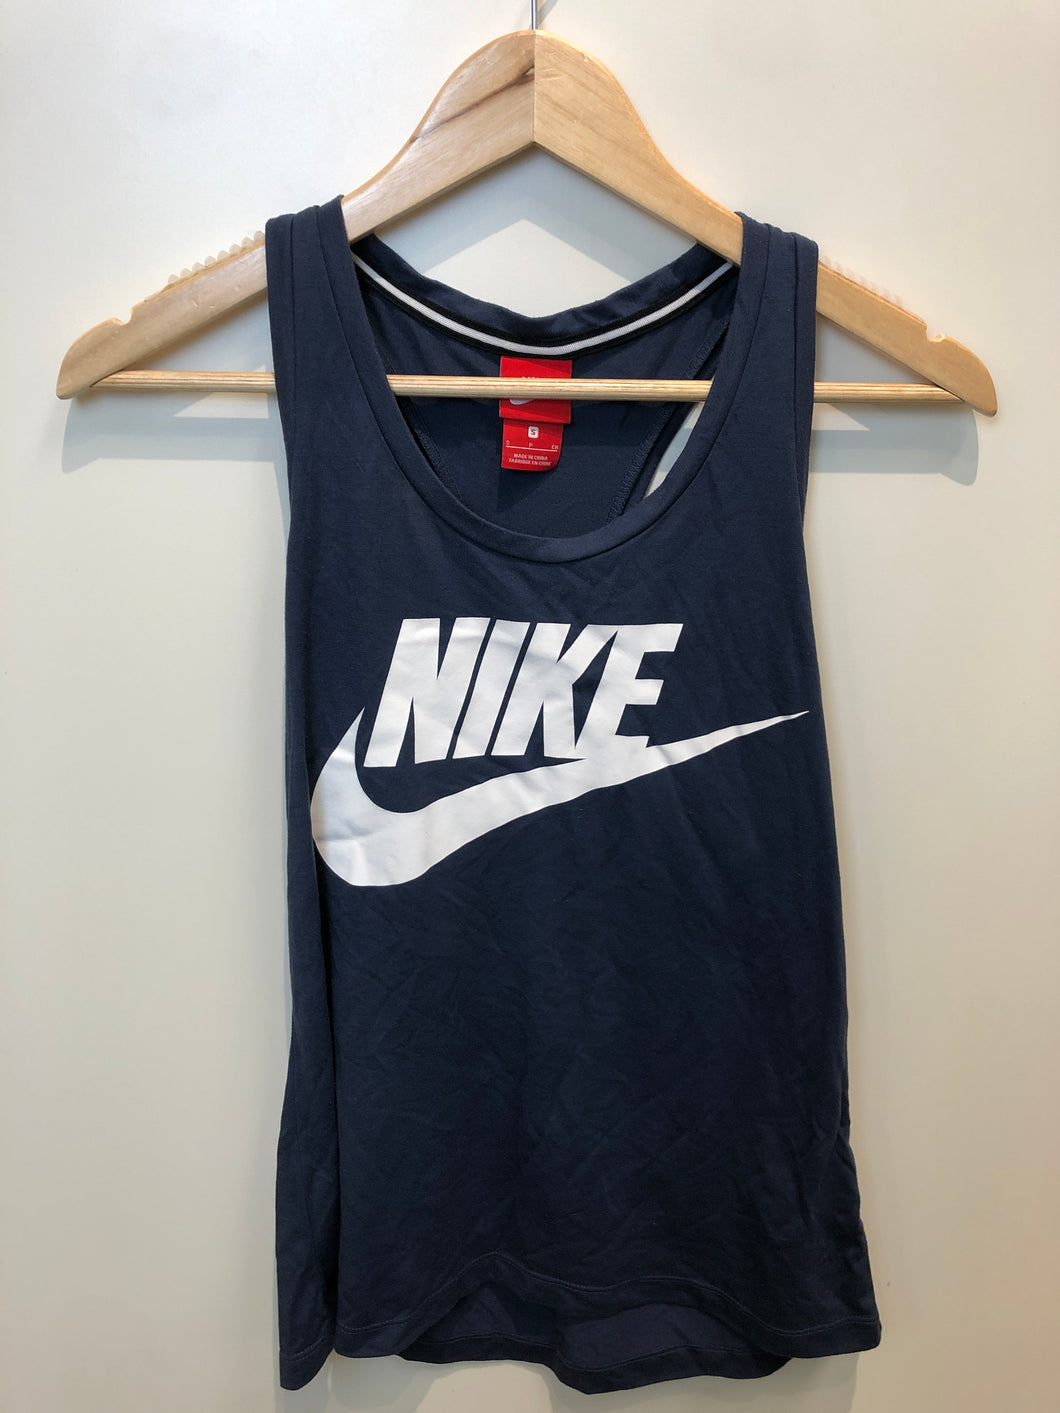 Nike Athletic Top Size Small